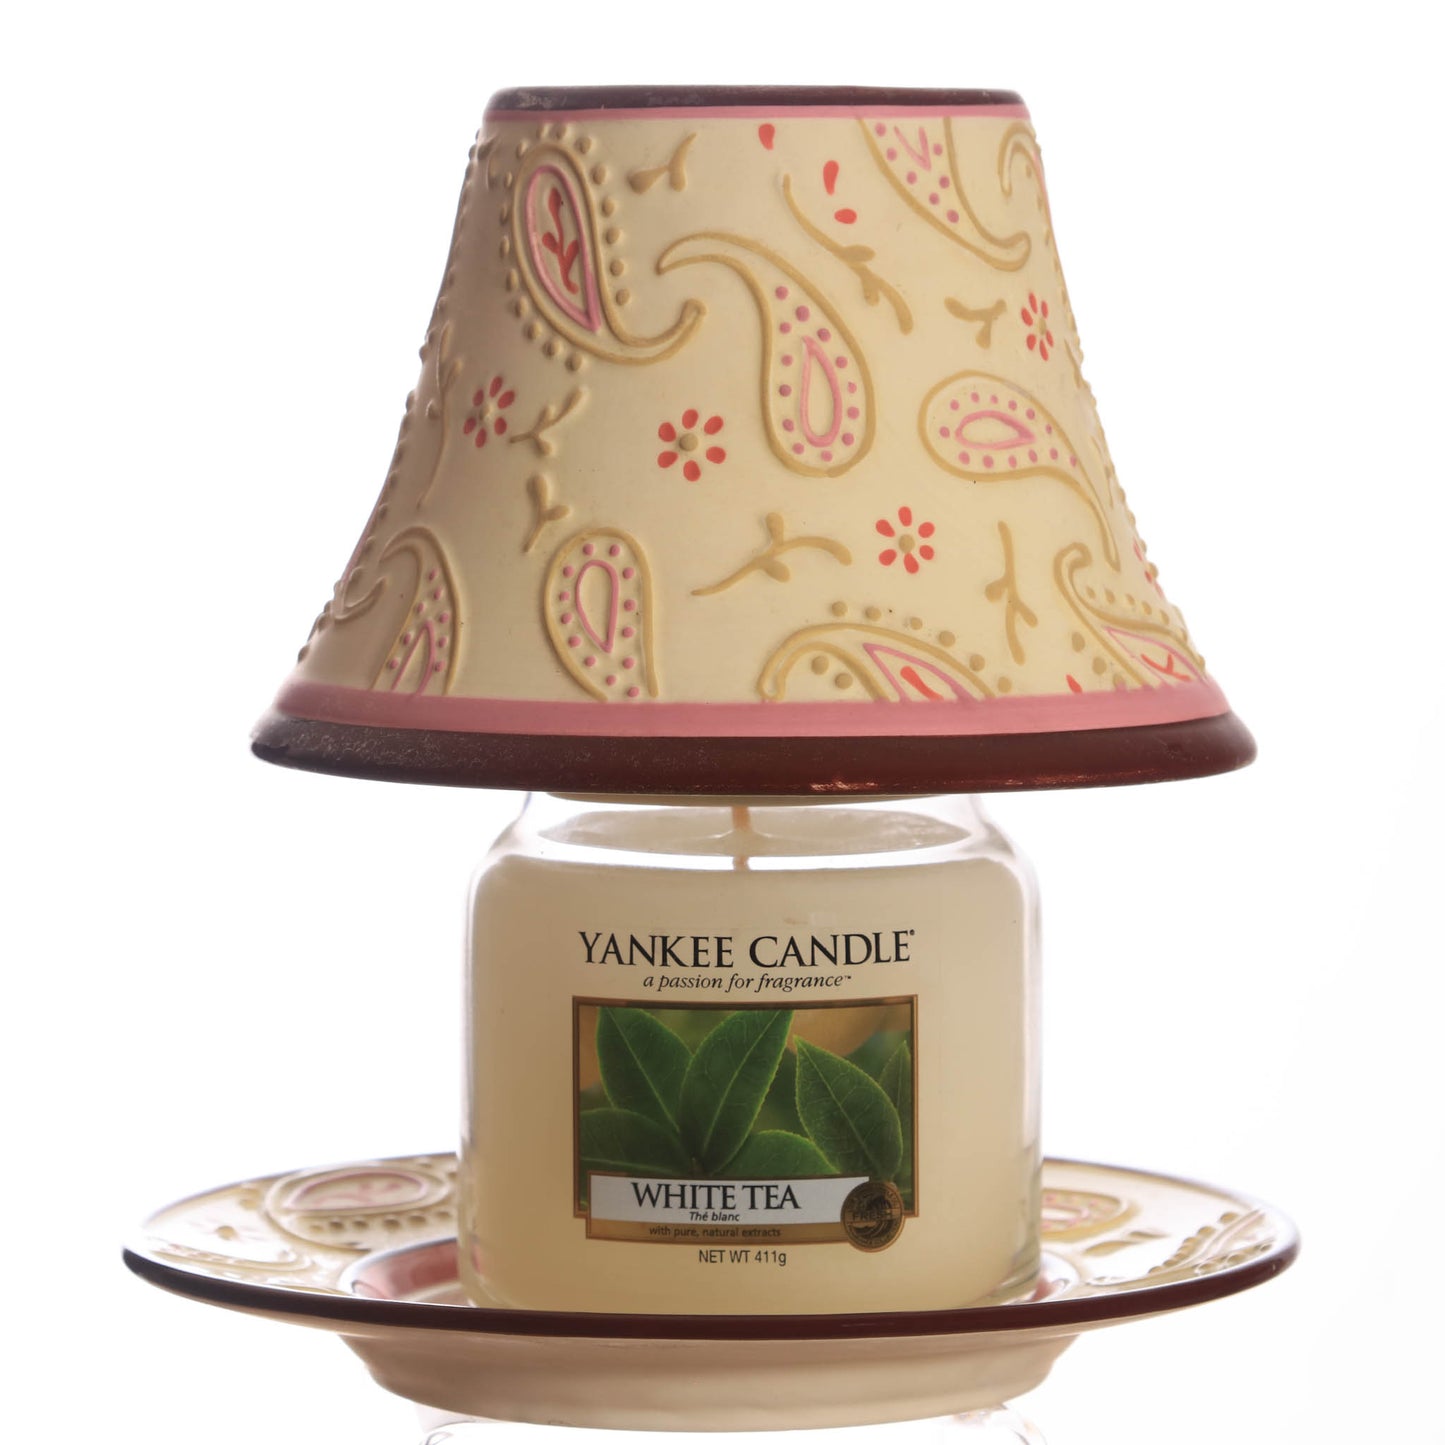 Yankee Candle Shade and tray for Medium Large Candles, Deco Swirl